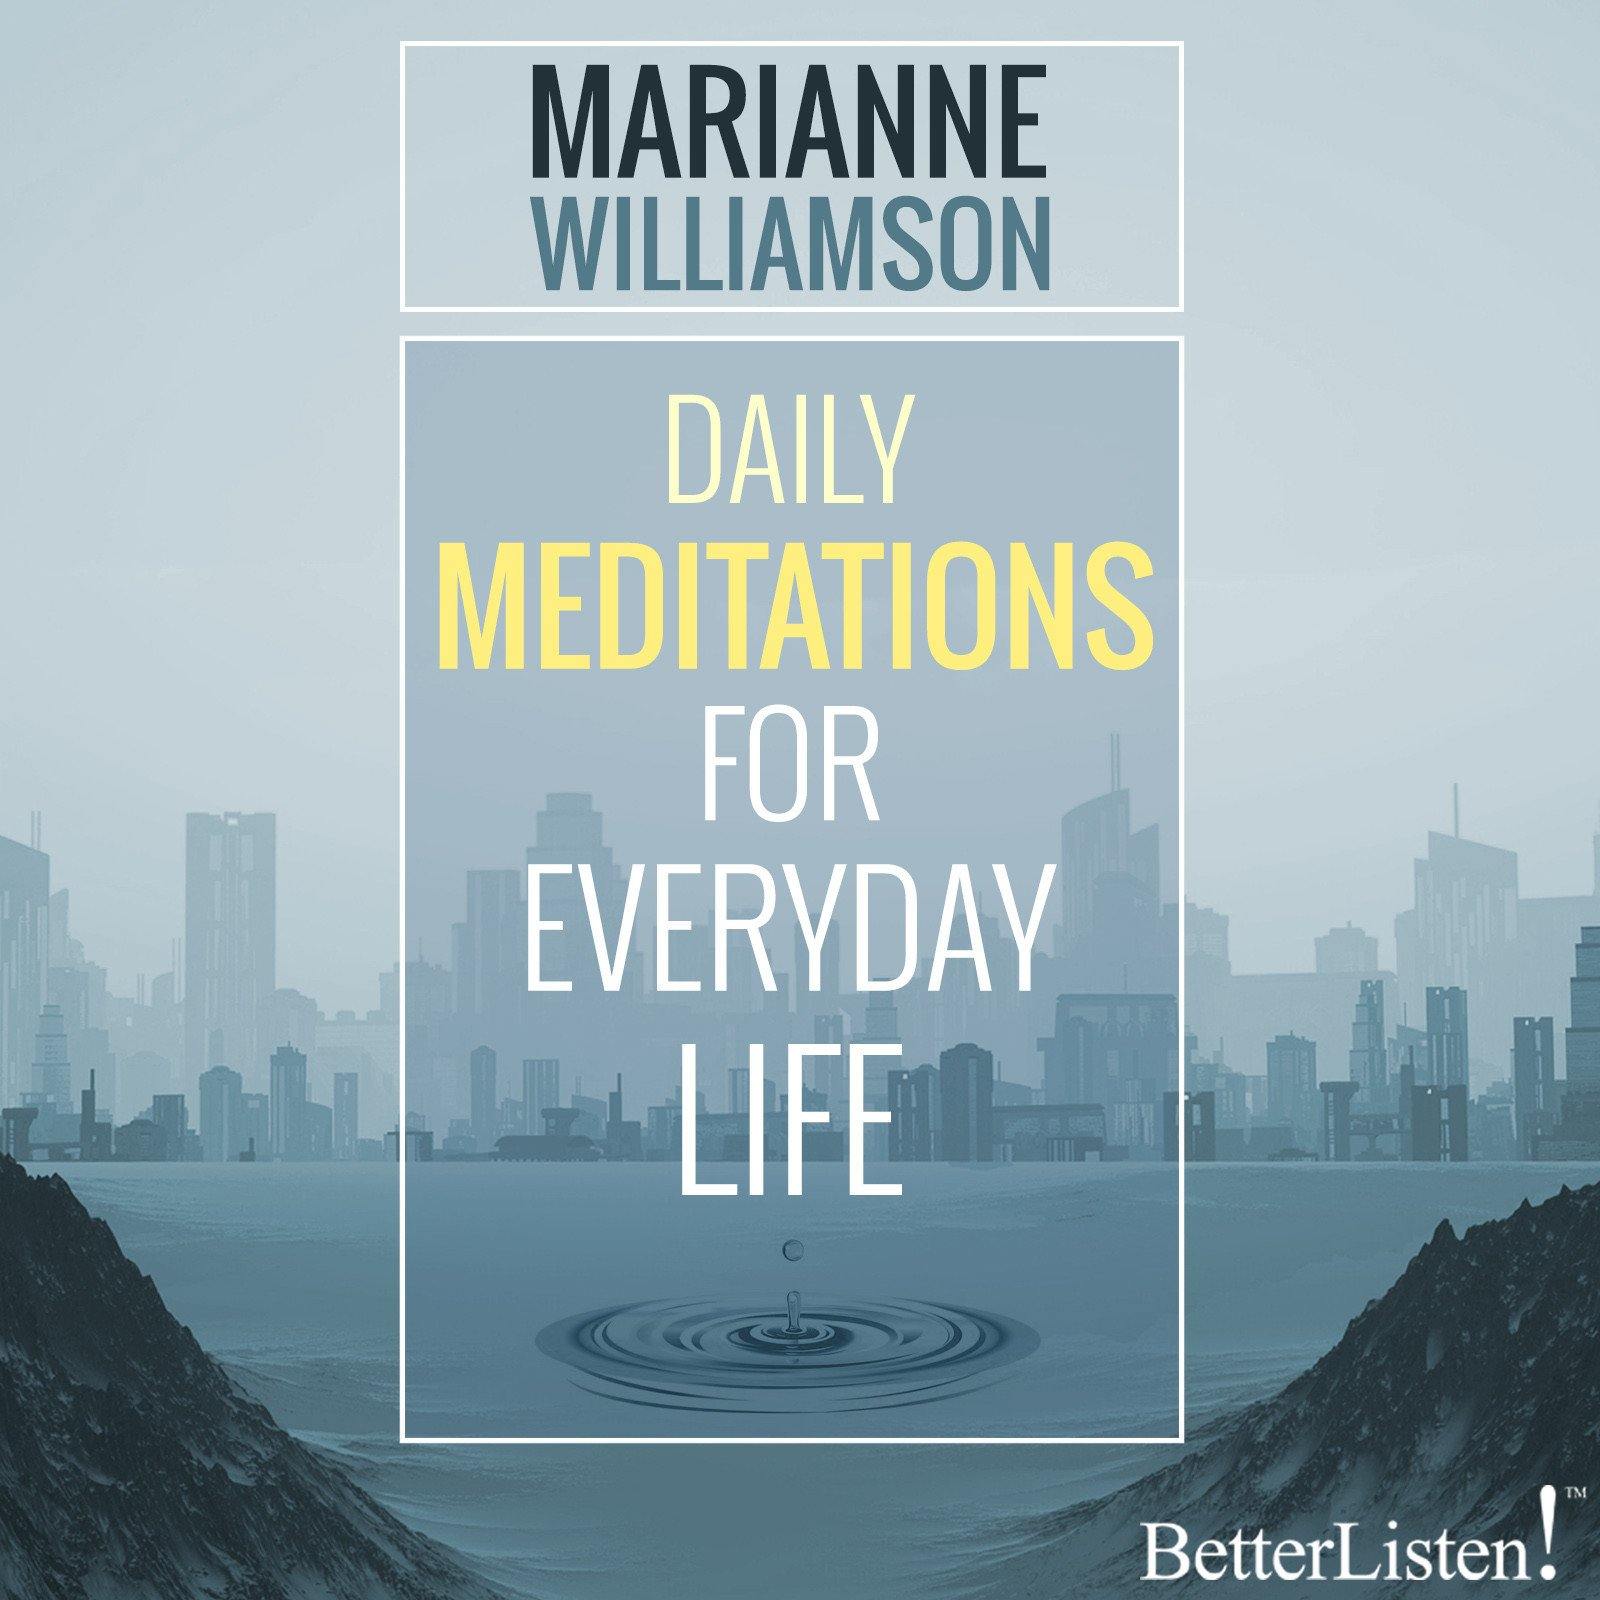 Daily Meditations for Everyday Life with Marianne Williamson Audio Program Marianne Williamson - BetterListen!